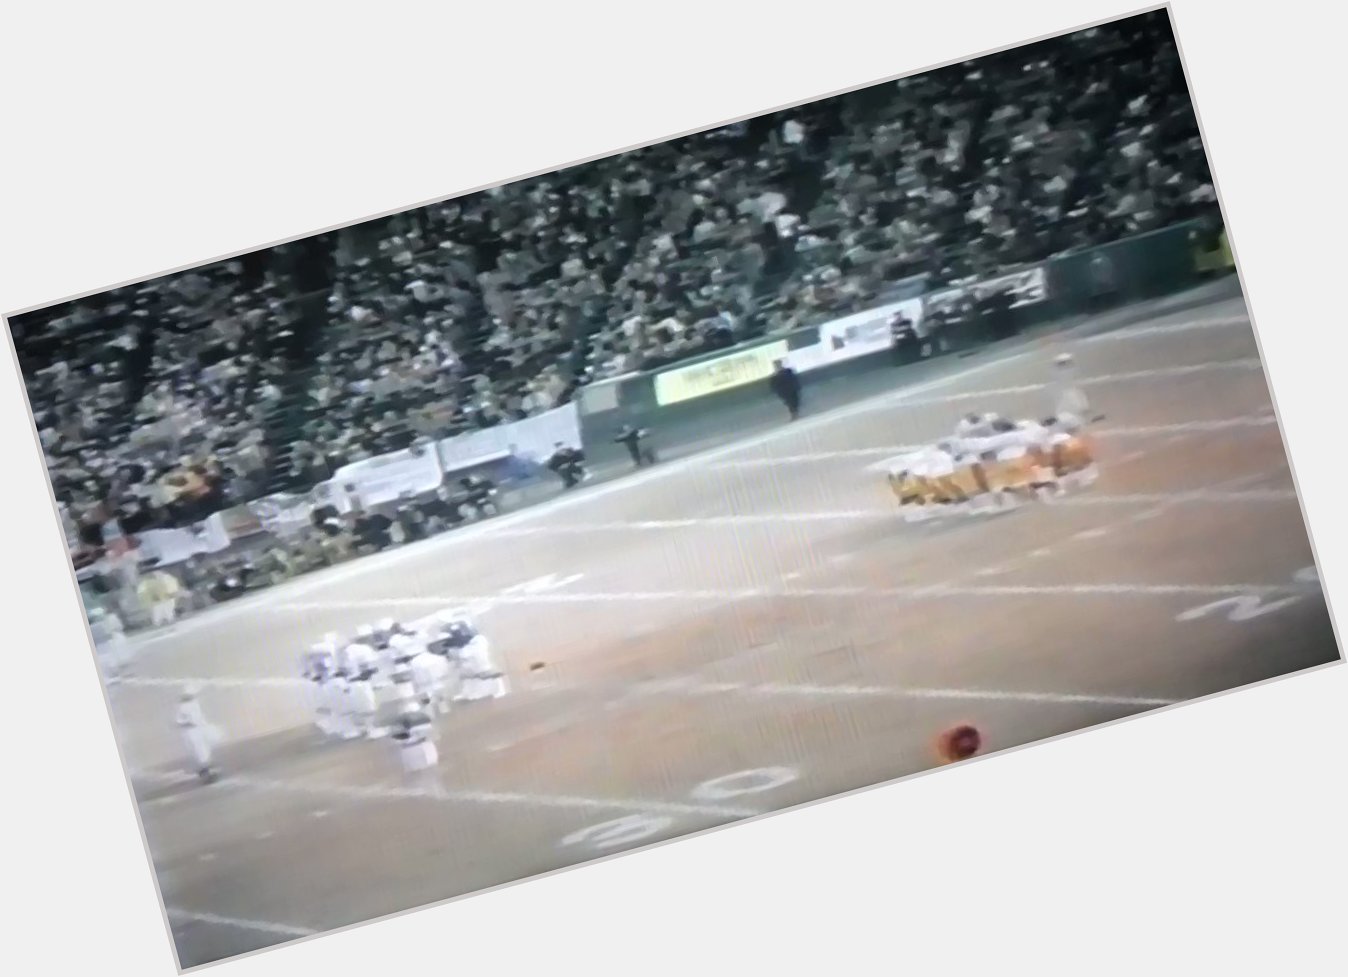 Happy birthday, Terry Bradshaw!

Here he is tossing a TD in the 76 playoffs. 